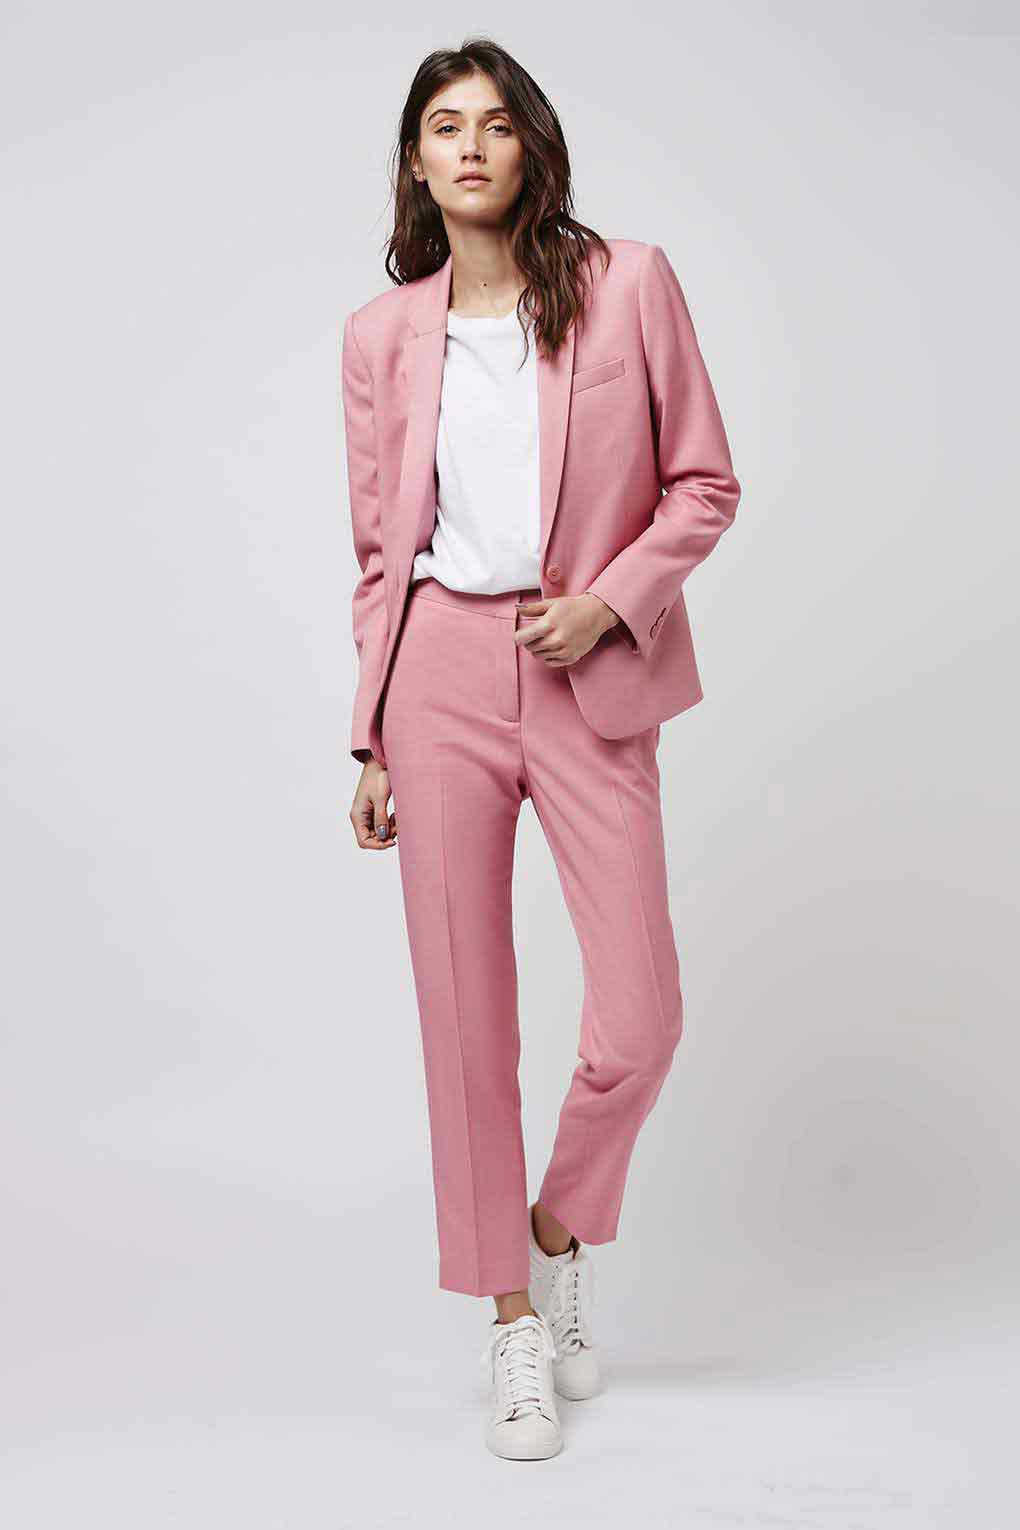 Pink and white business suit – FashionEven